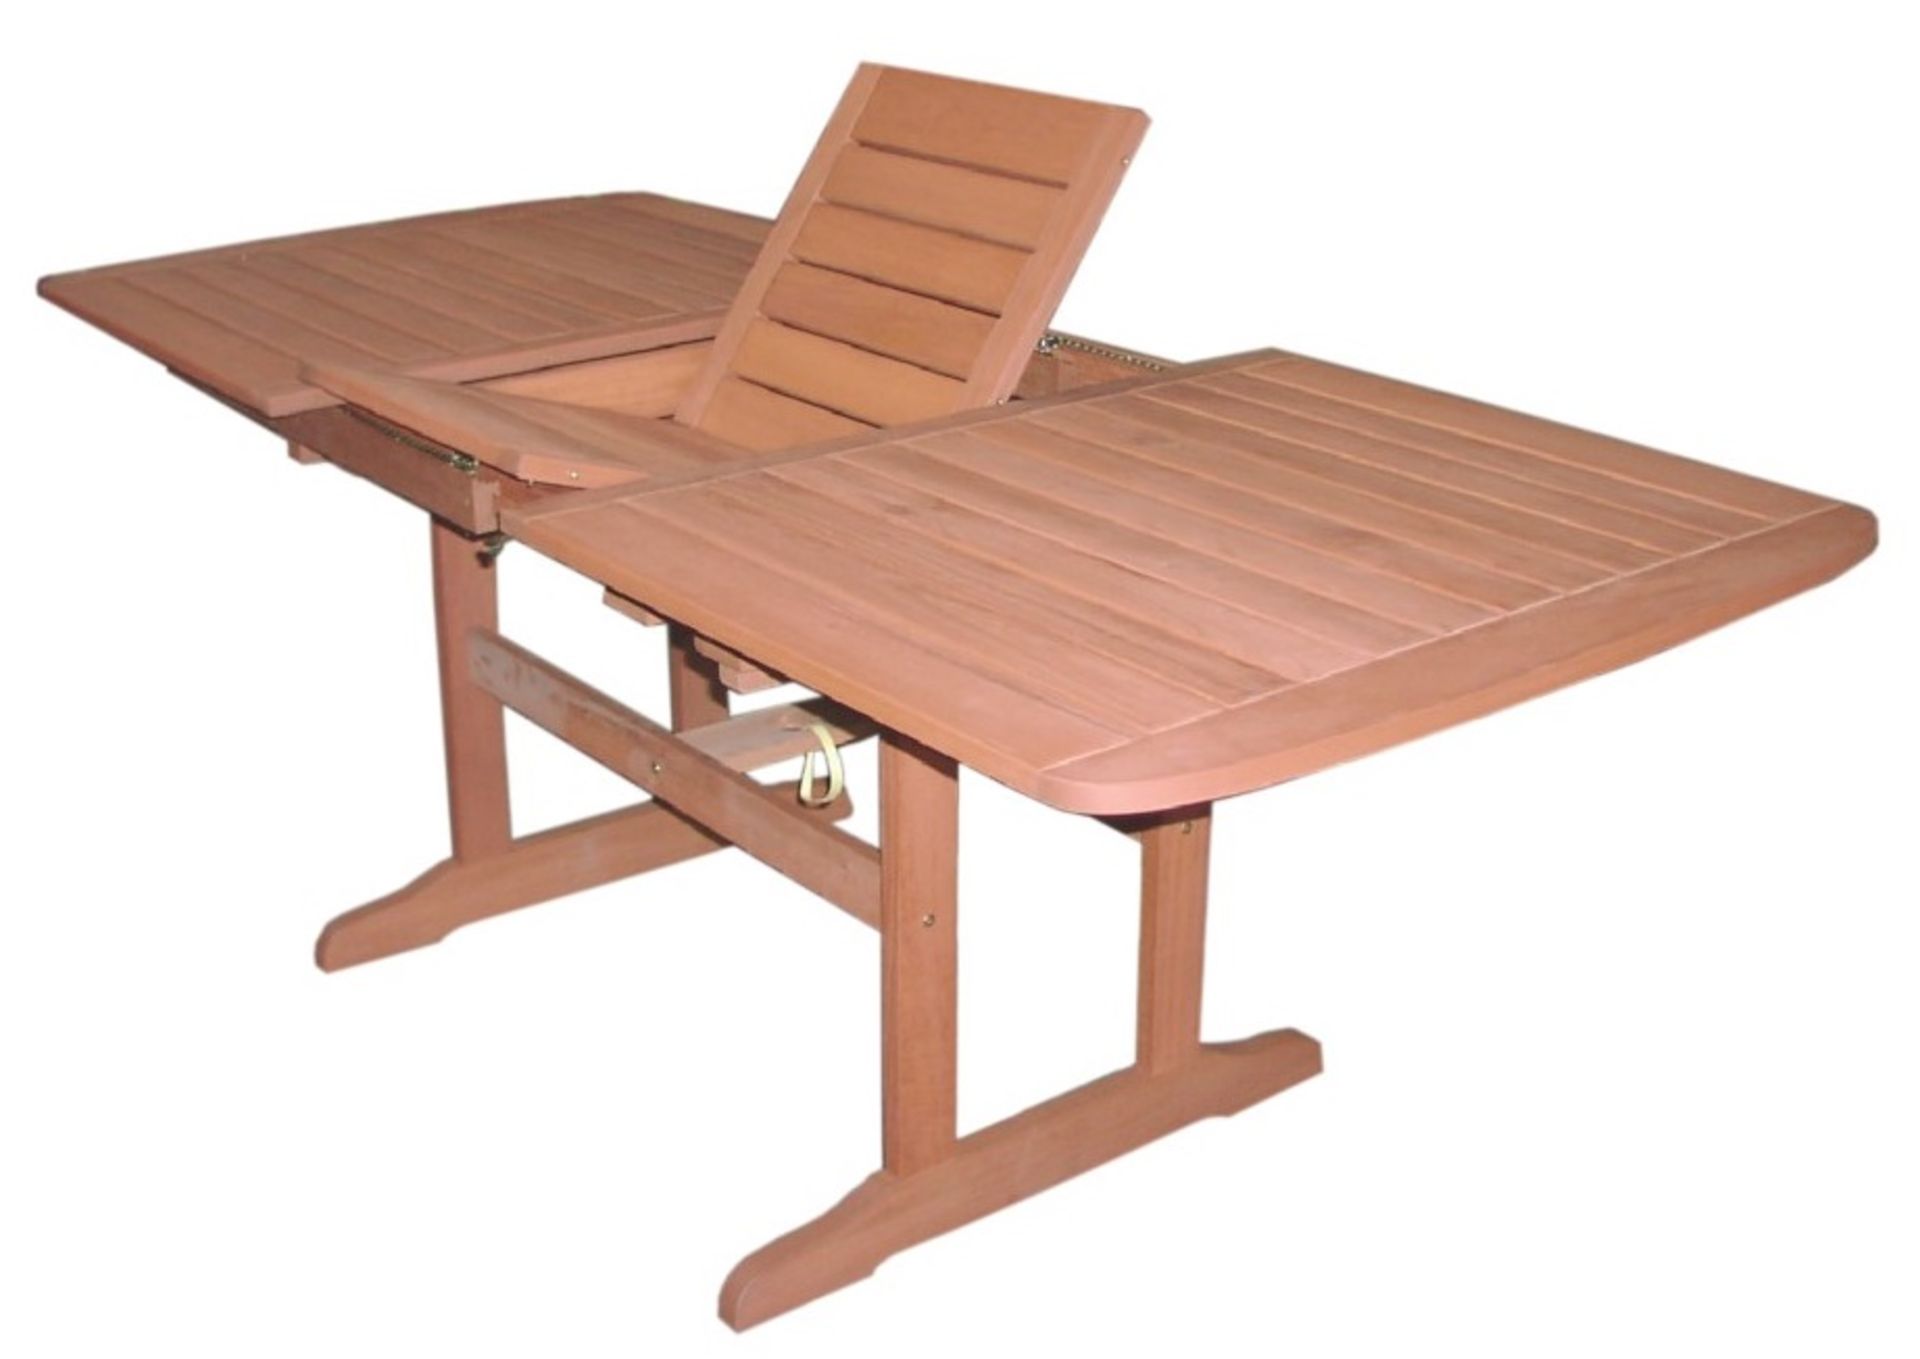 5-Piece Garden Furniture Set Includes 1 x Table Extending (Rectangular) & 4 x Armchairs - Made - Image 2 of 2